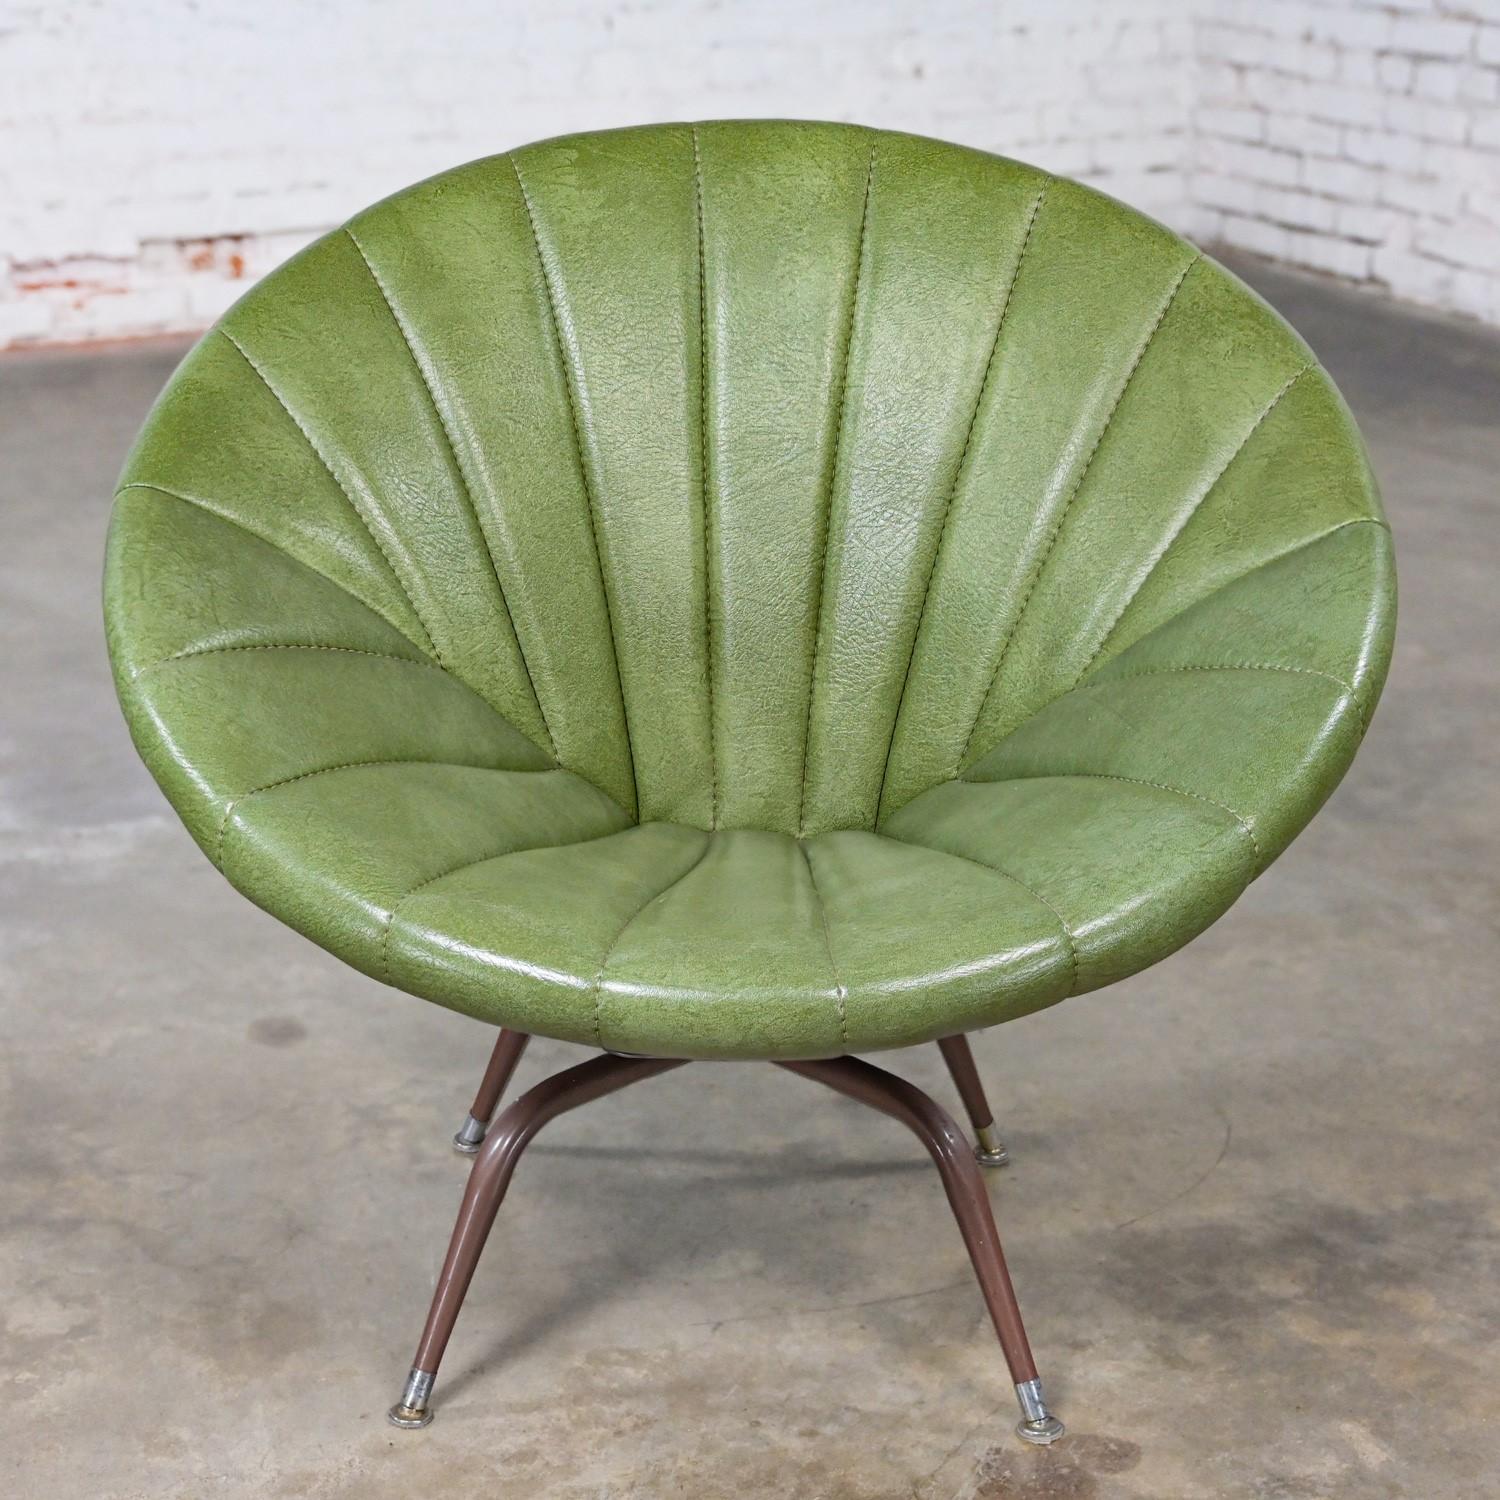 20th Century Mid Century Modern Green Faux Leather Tub or Saucer Swivel Chair with Metal Base